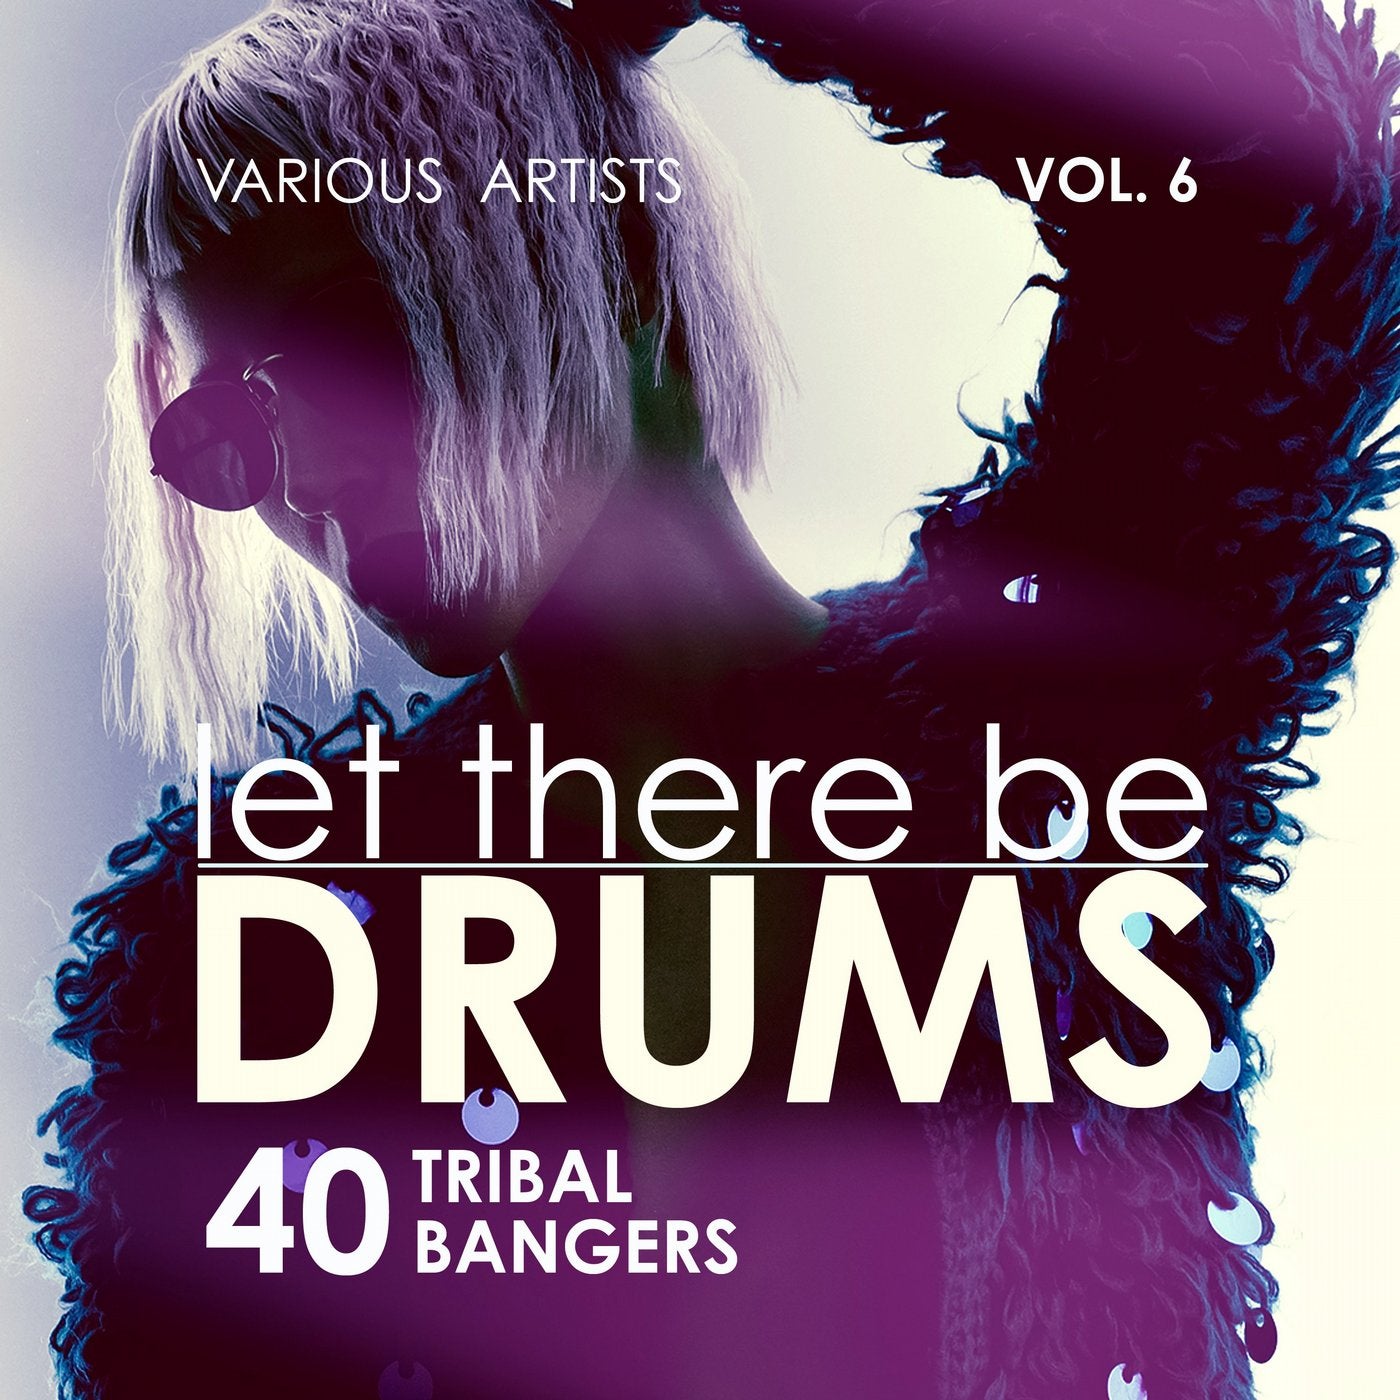 Let There Be Drums, Vol. 6 (40 Tribal Bangers)